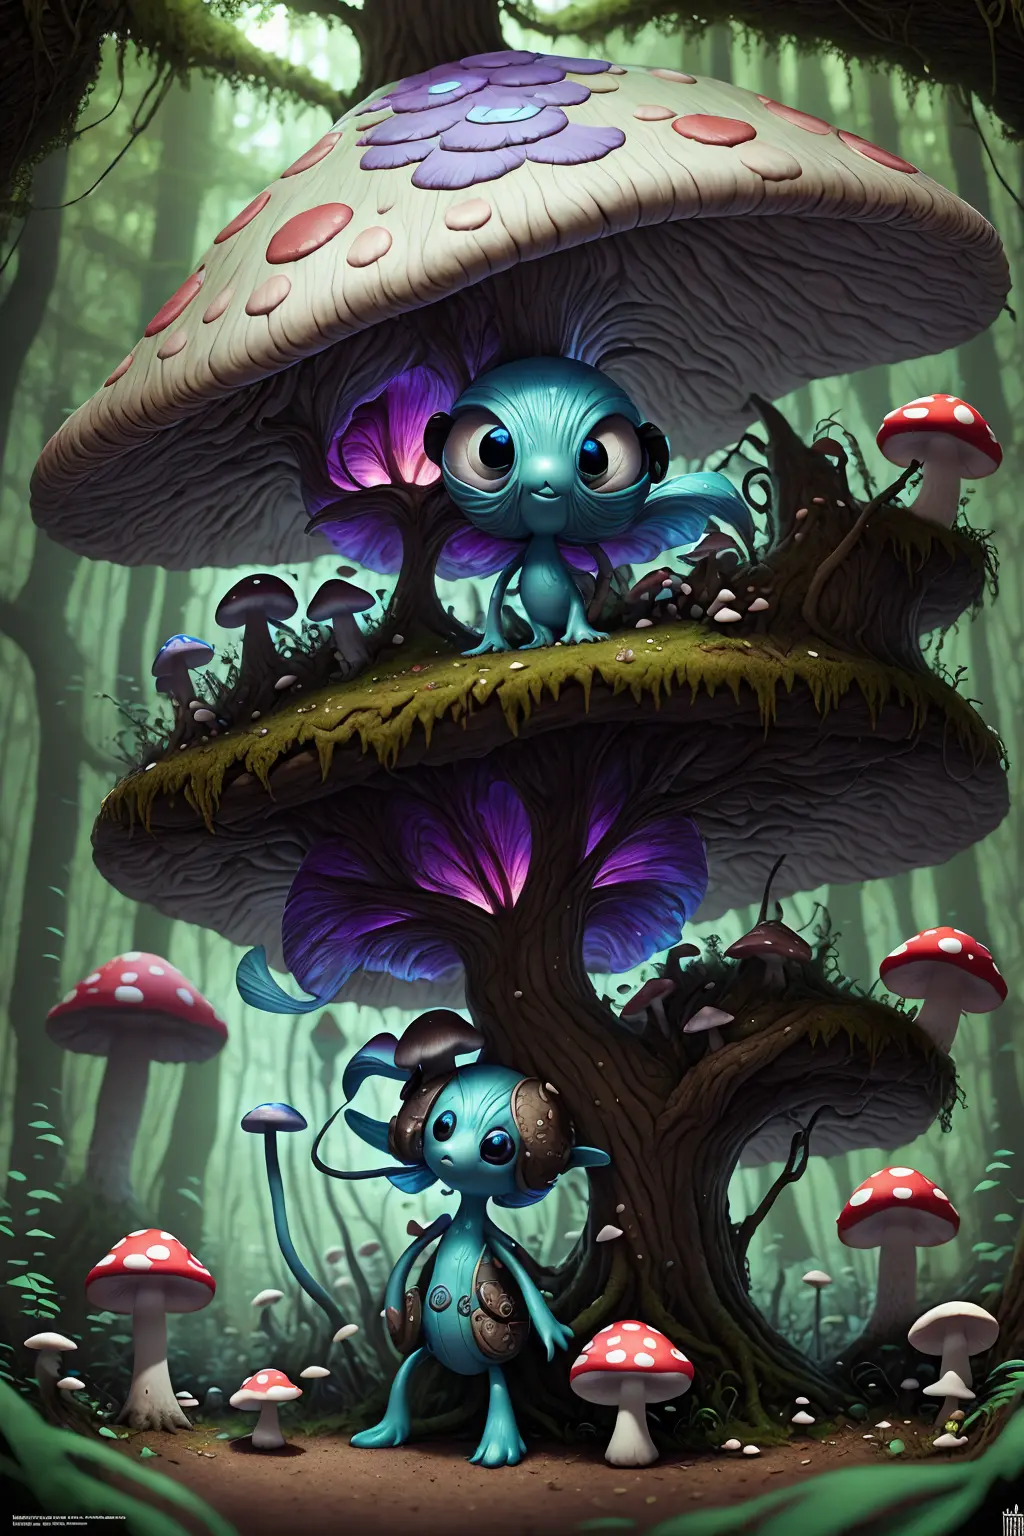 there is a small alien doll with a blue hair and a mushroom hat, cute forest creature, beeple and jeremiah ketner, adorable digi...